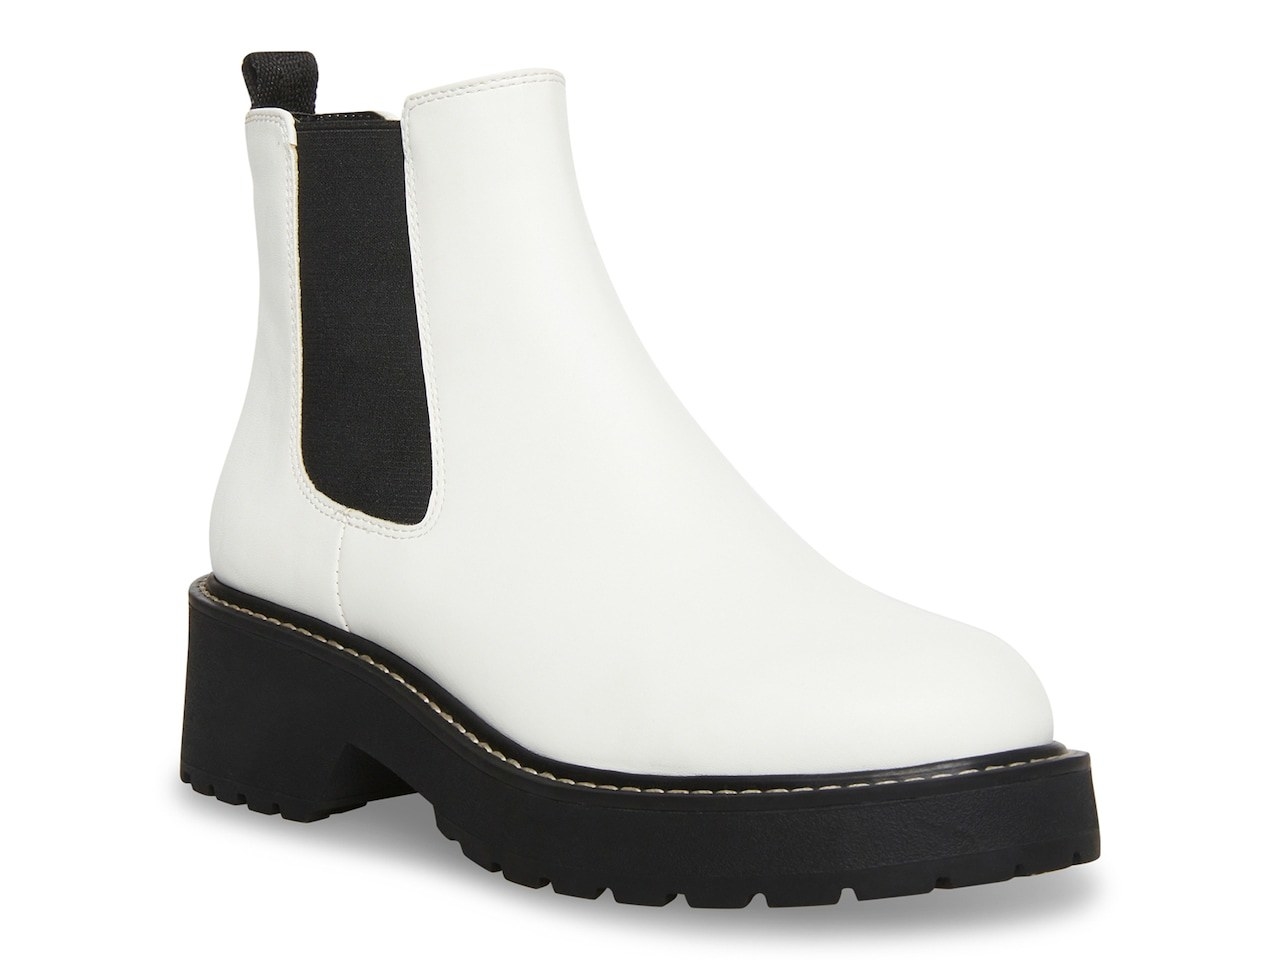 Chelsea boots in white